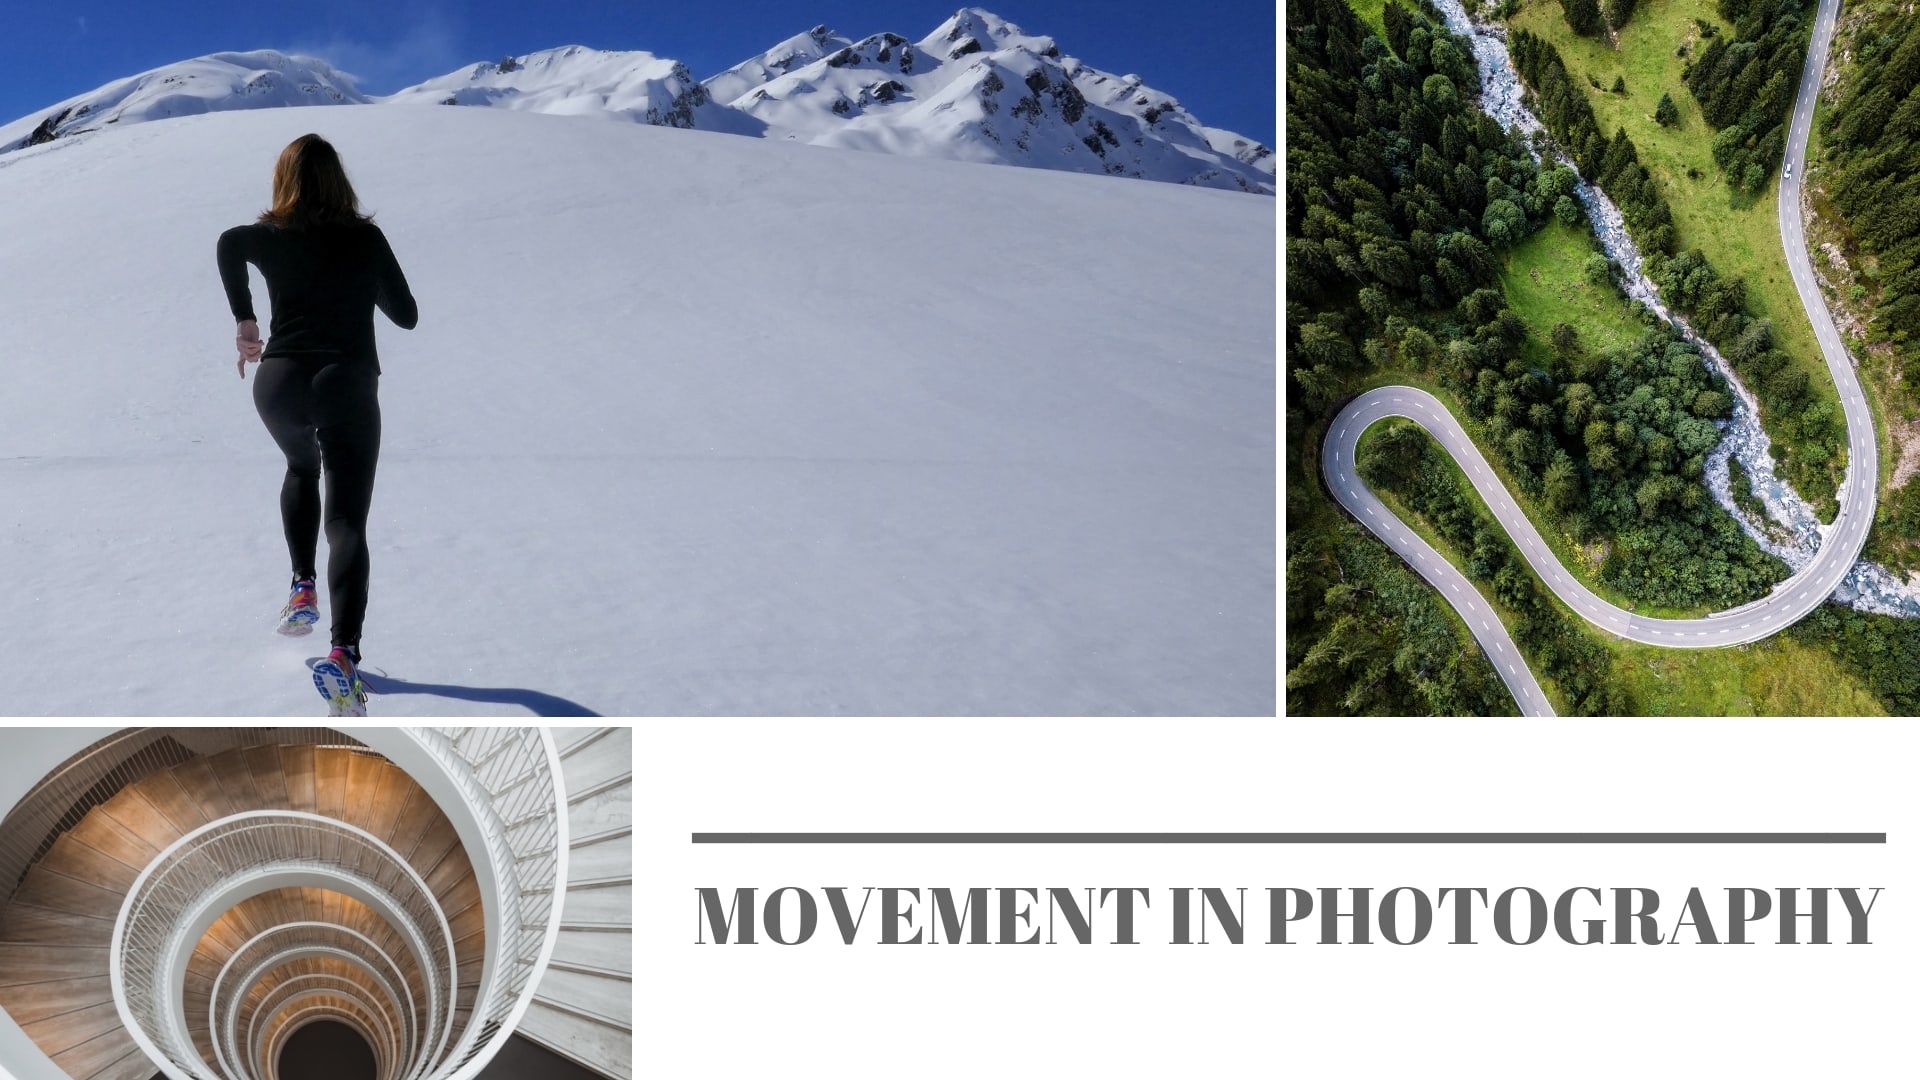 MOVEMENT IN PHOTOGRAPHY